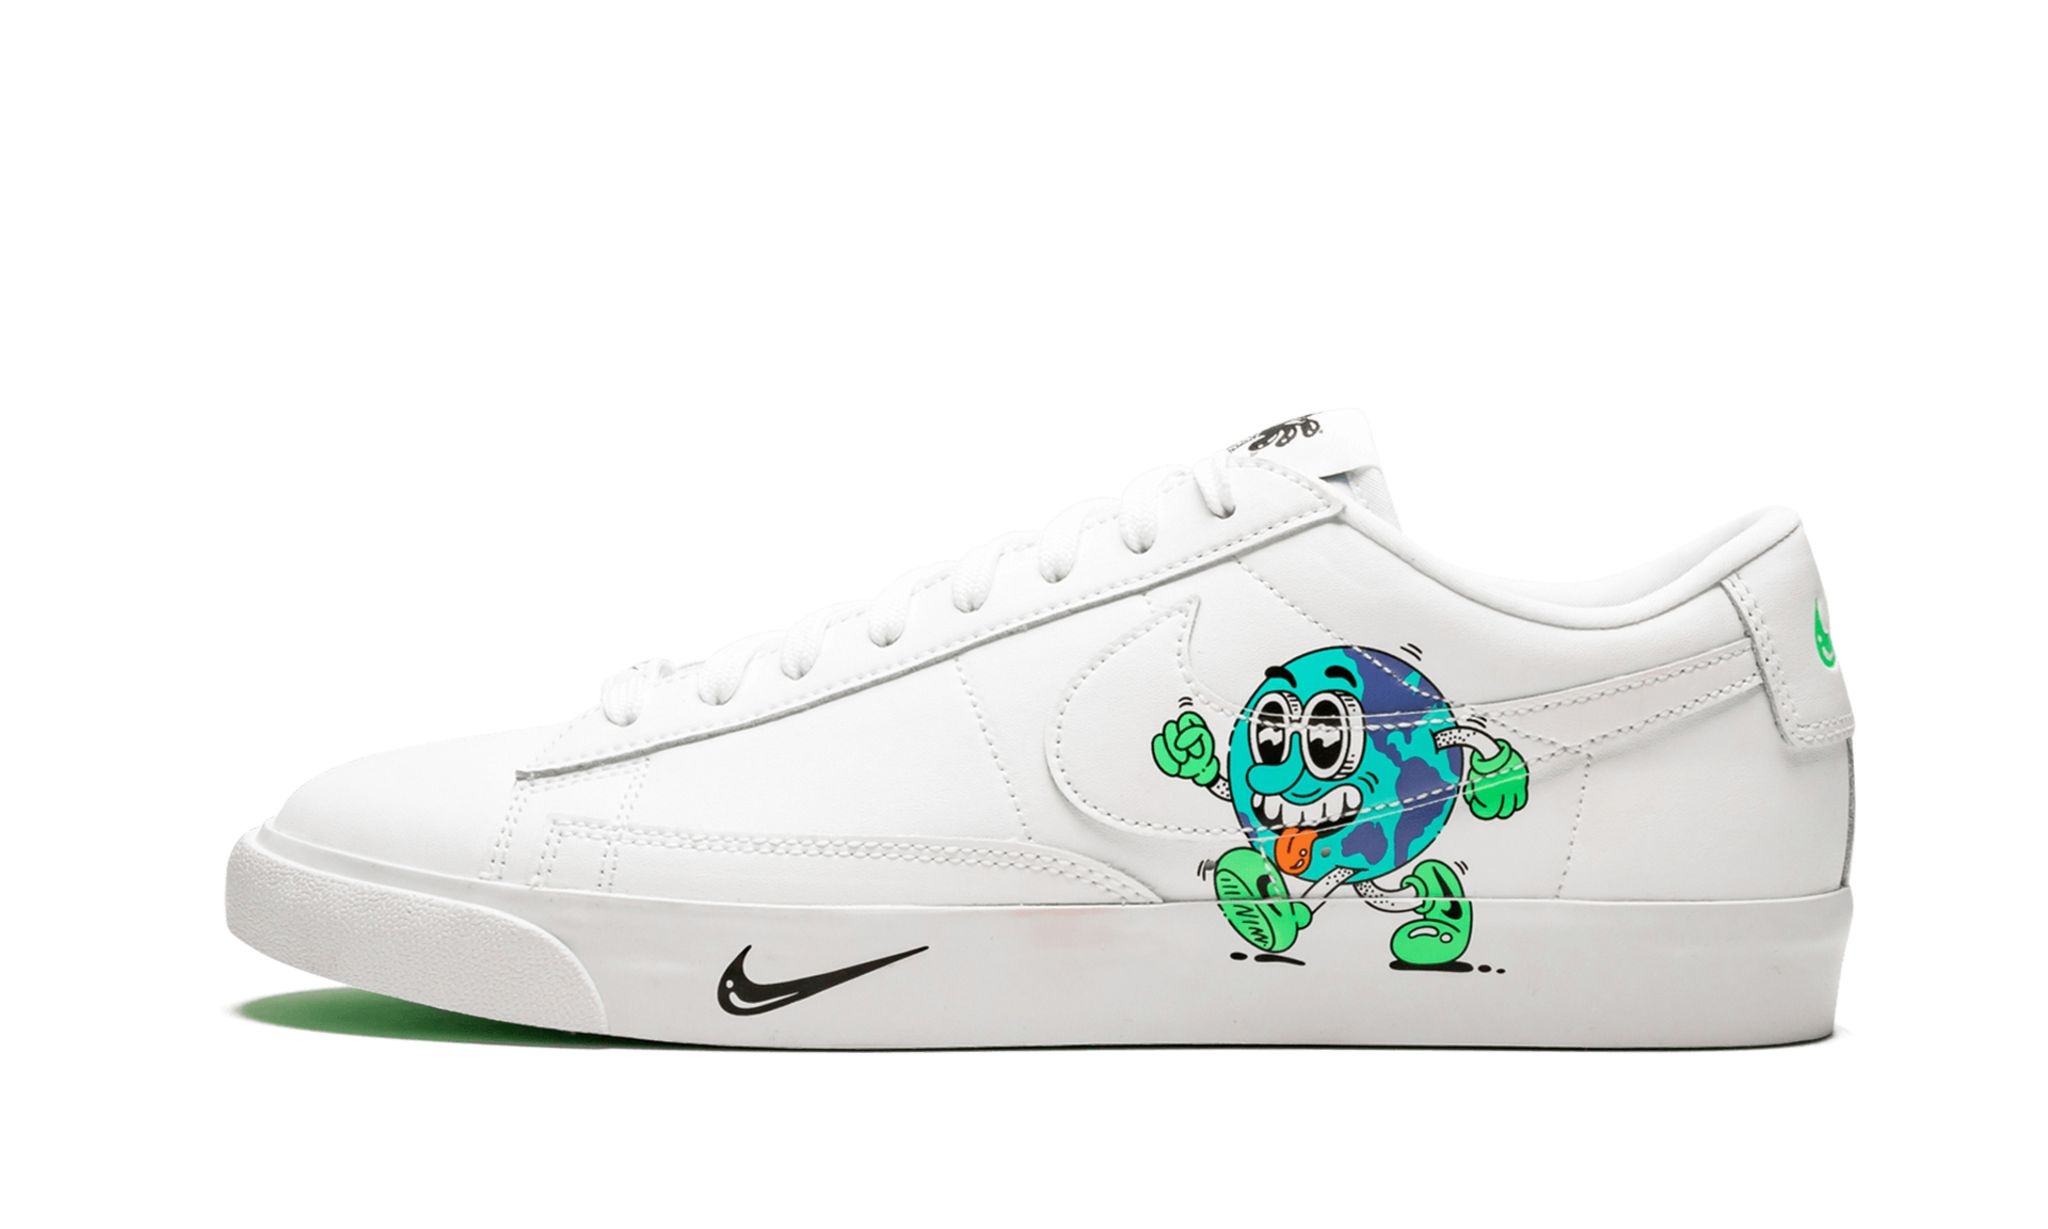 Blazer Low Flyleather QS "Earth Day" - 1